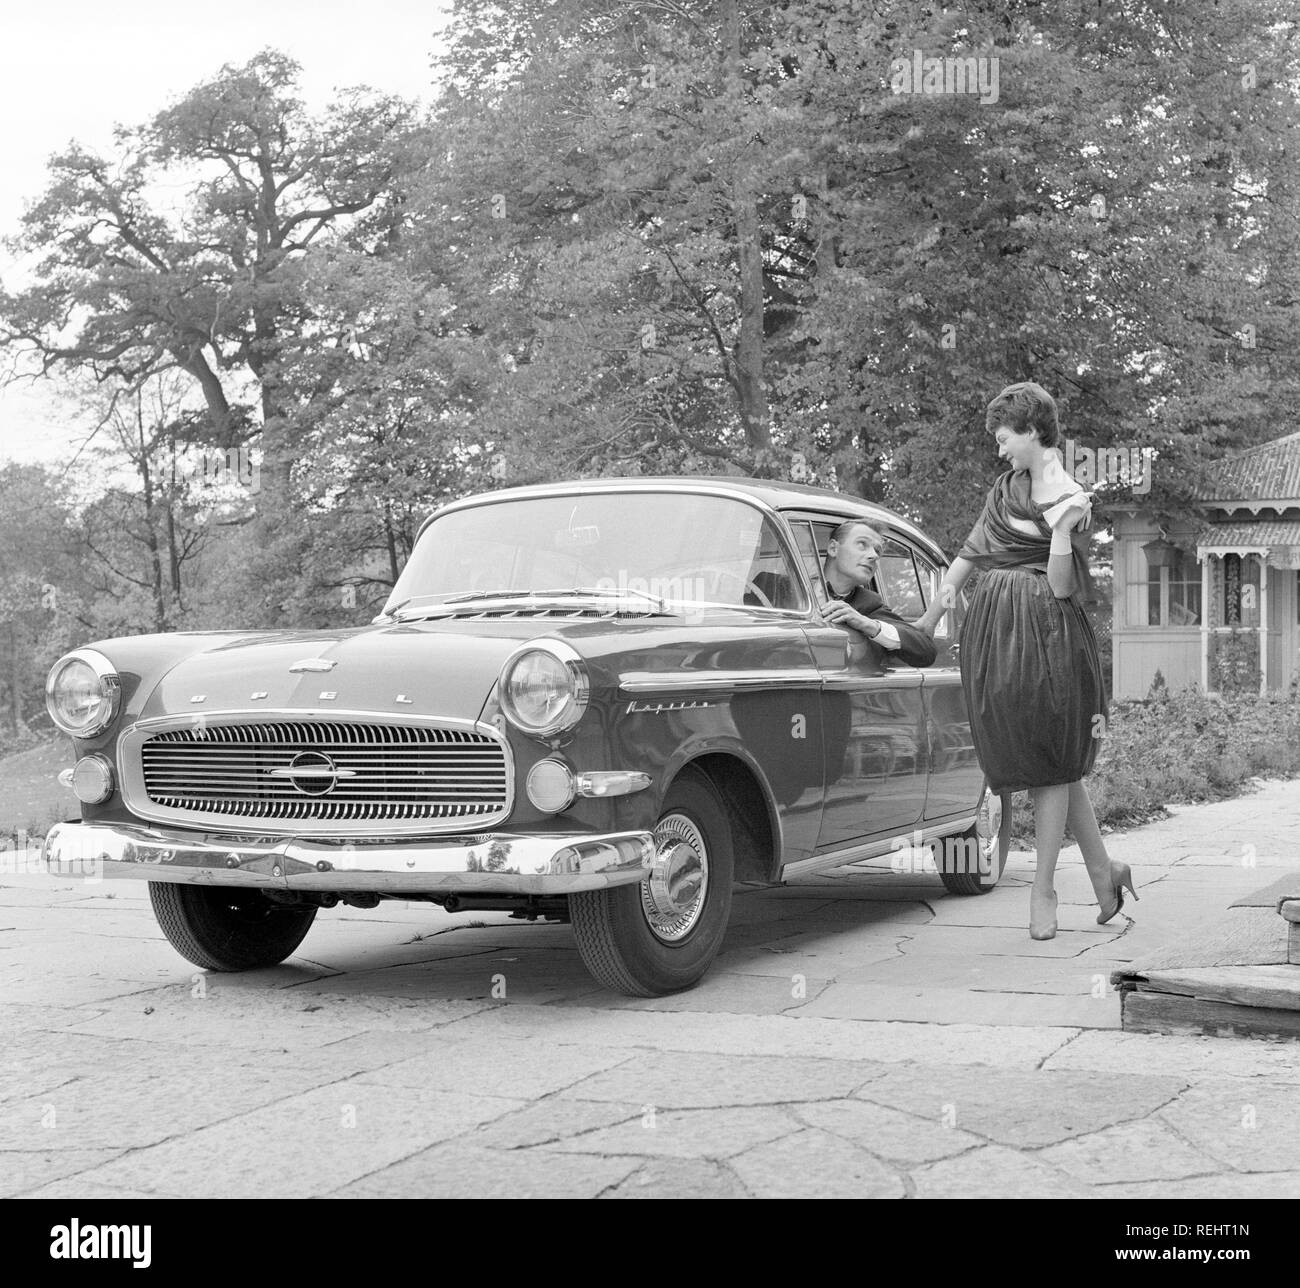 Driving in the 1950s. A young woman is standing beside a car Opel Kapitän, talking to a man behind the wheel. She is fashionable dressed in a typical 1950s dress. Photo Kristoffersson Ref CB93-3 Stock Photo